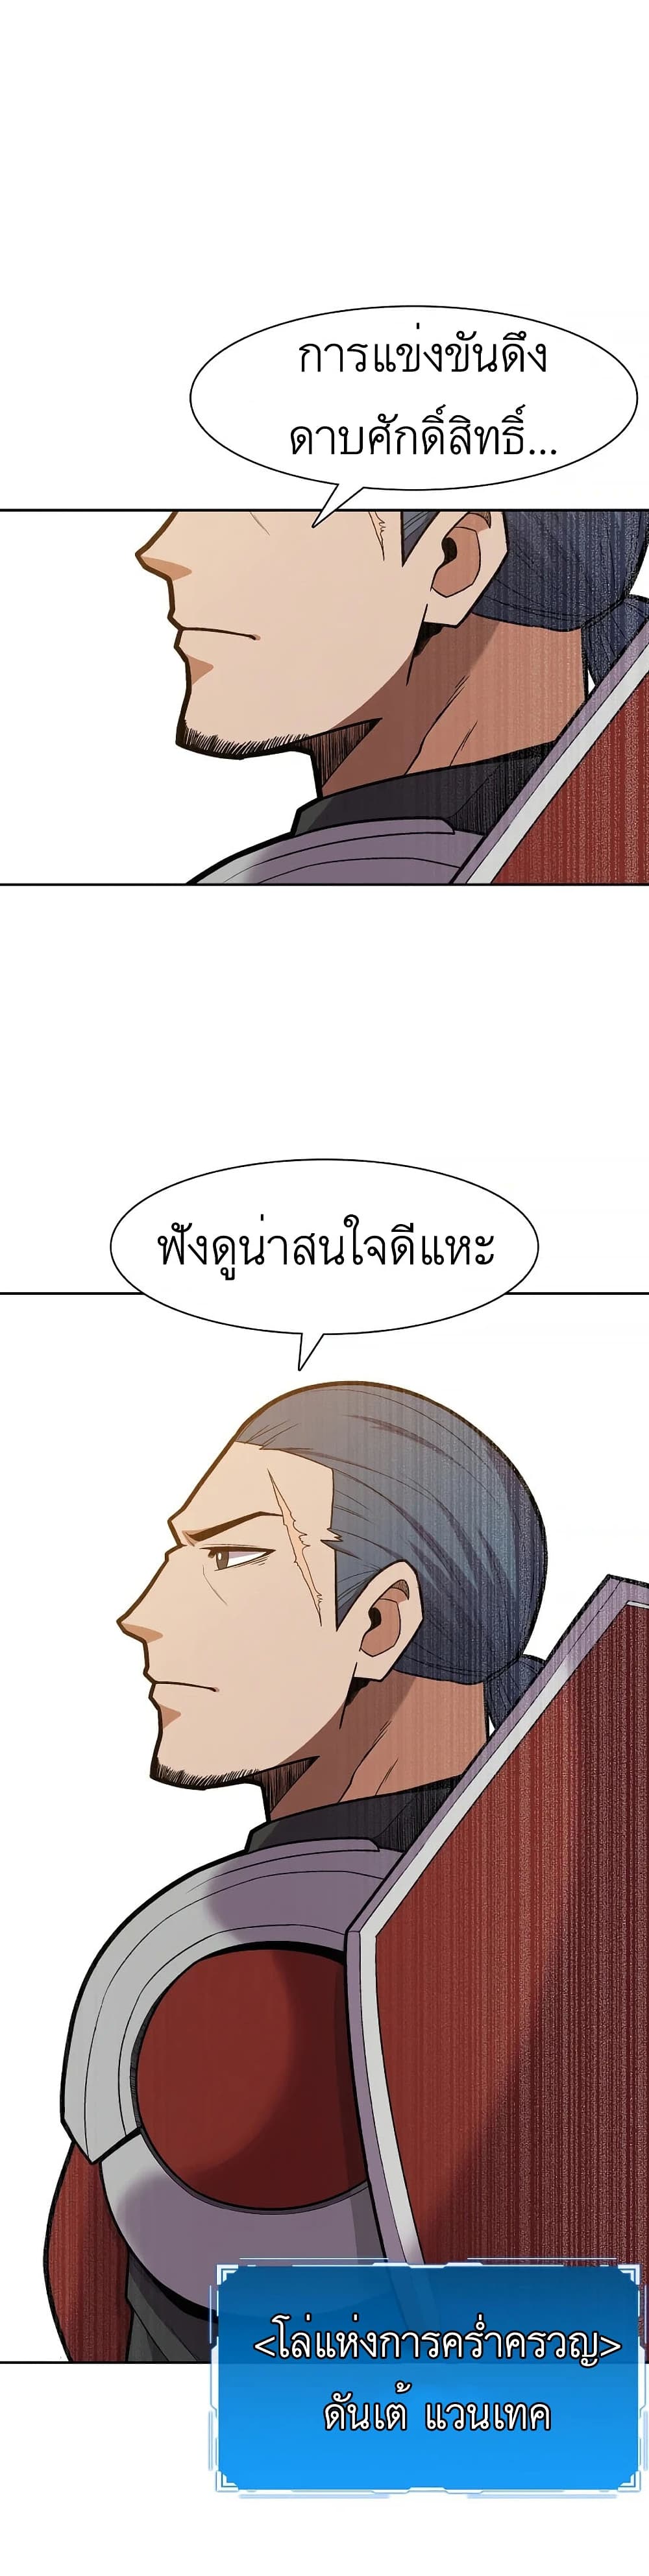 Raising Newbie Heroes In Another World ตอนที่ 12 (12)